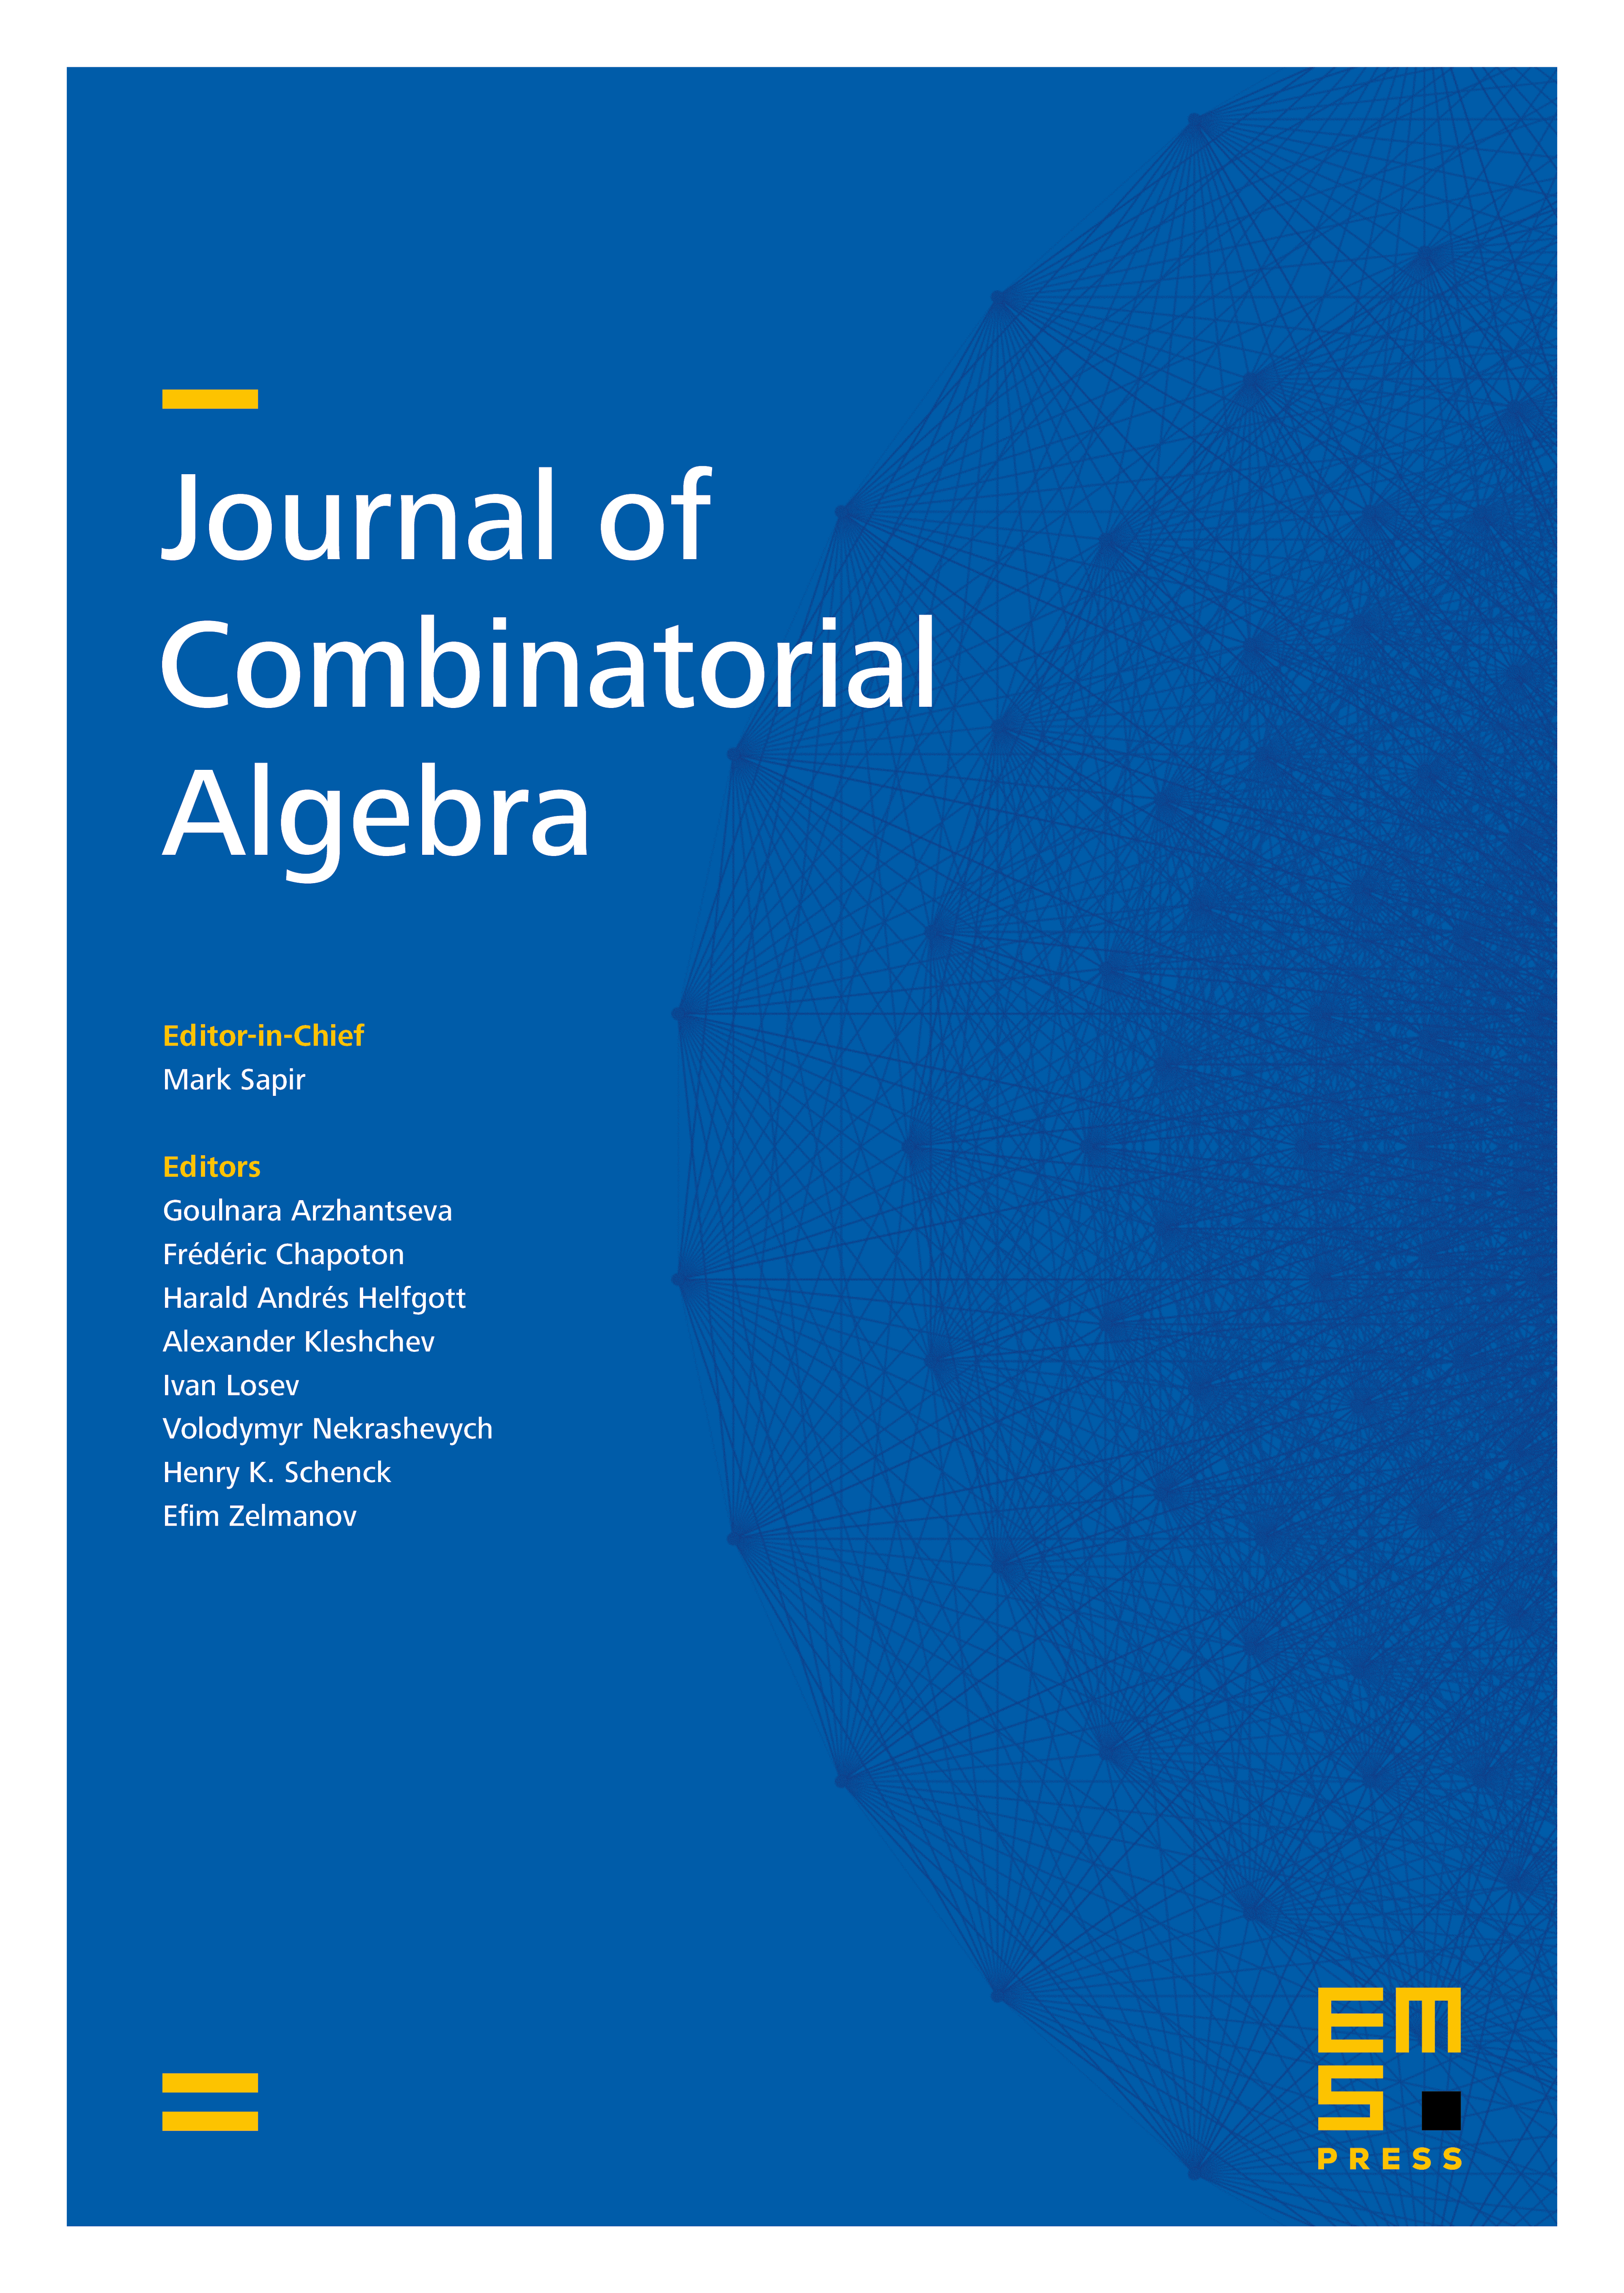 A partial order on bipartitions from the generalized Springer correspondence cover